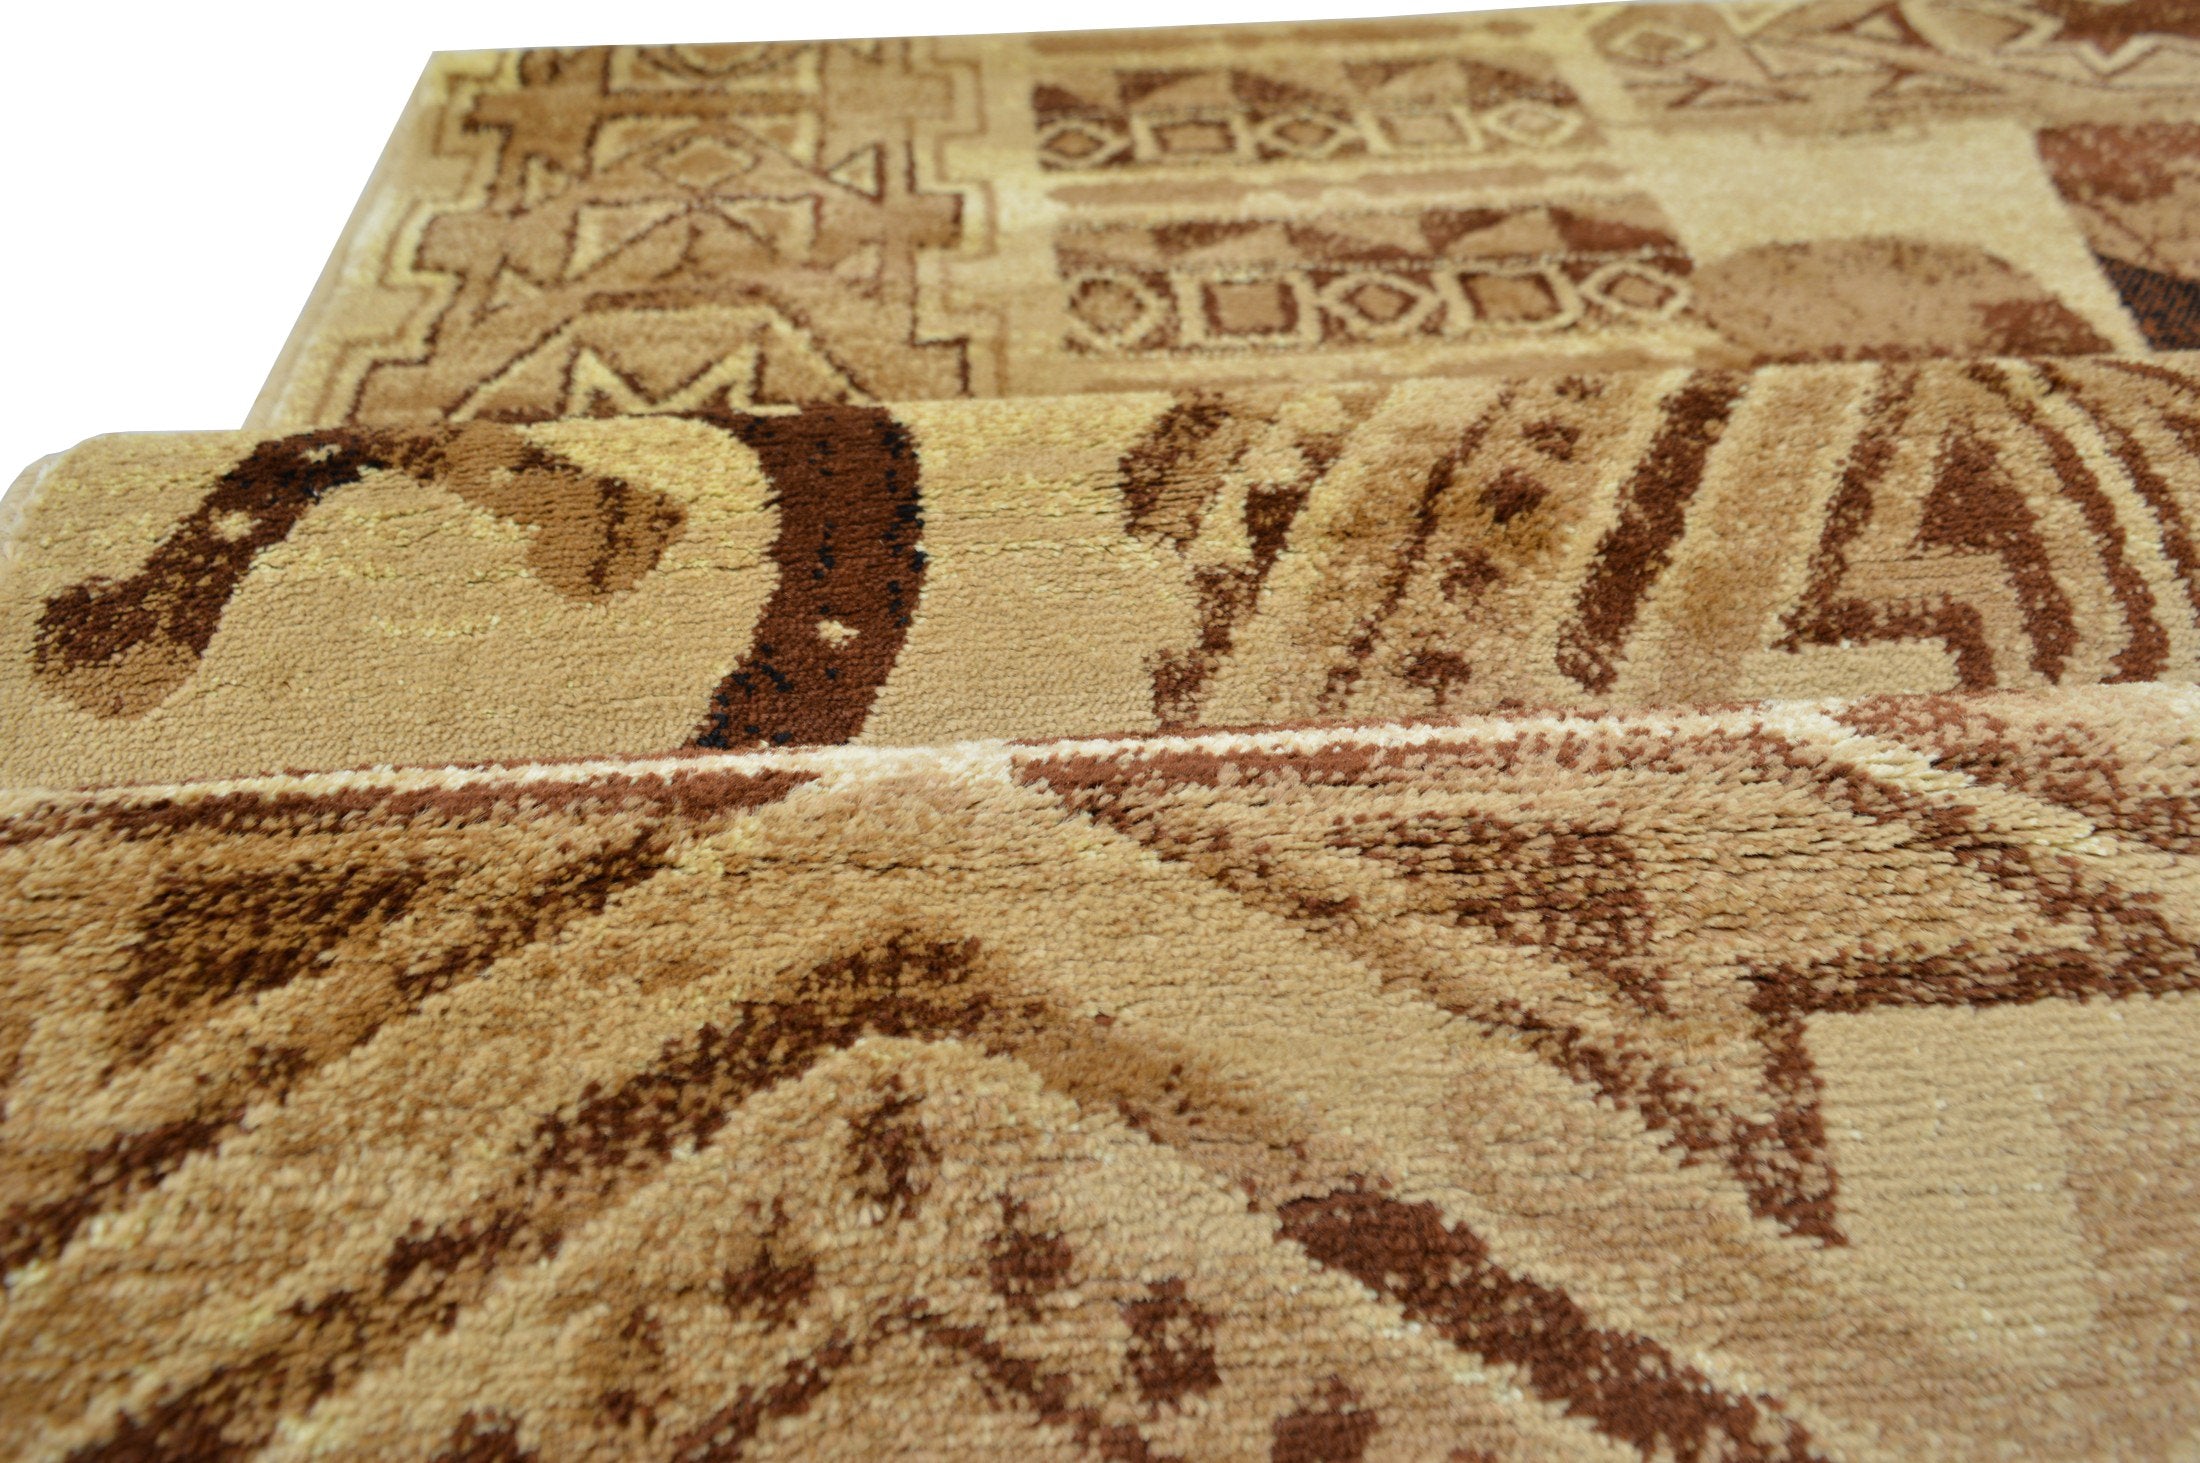 Cabin Area Rugs Rustic Cabin Novelty Rugs for Living Room